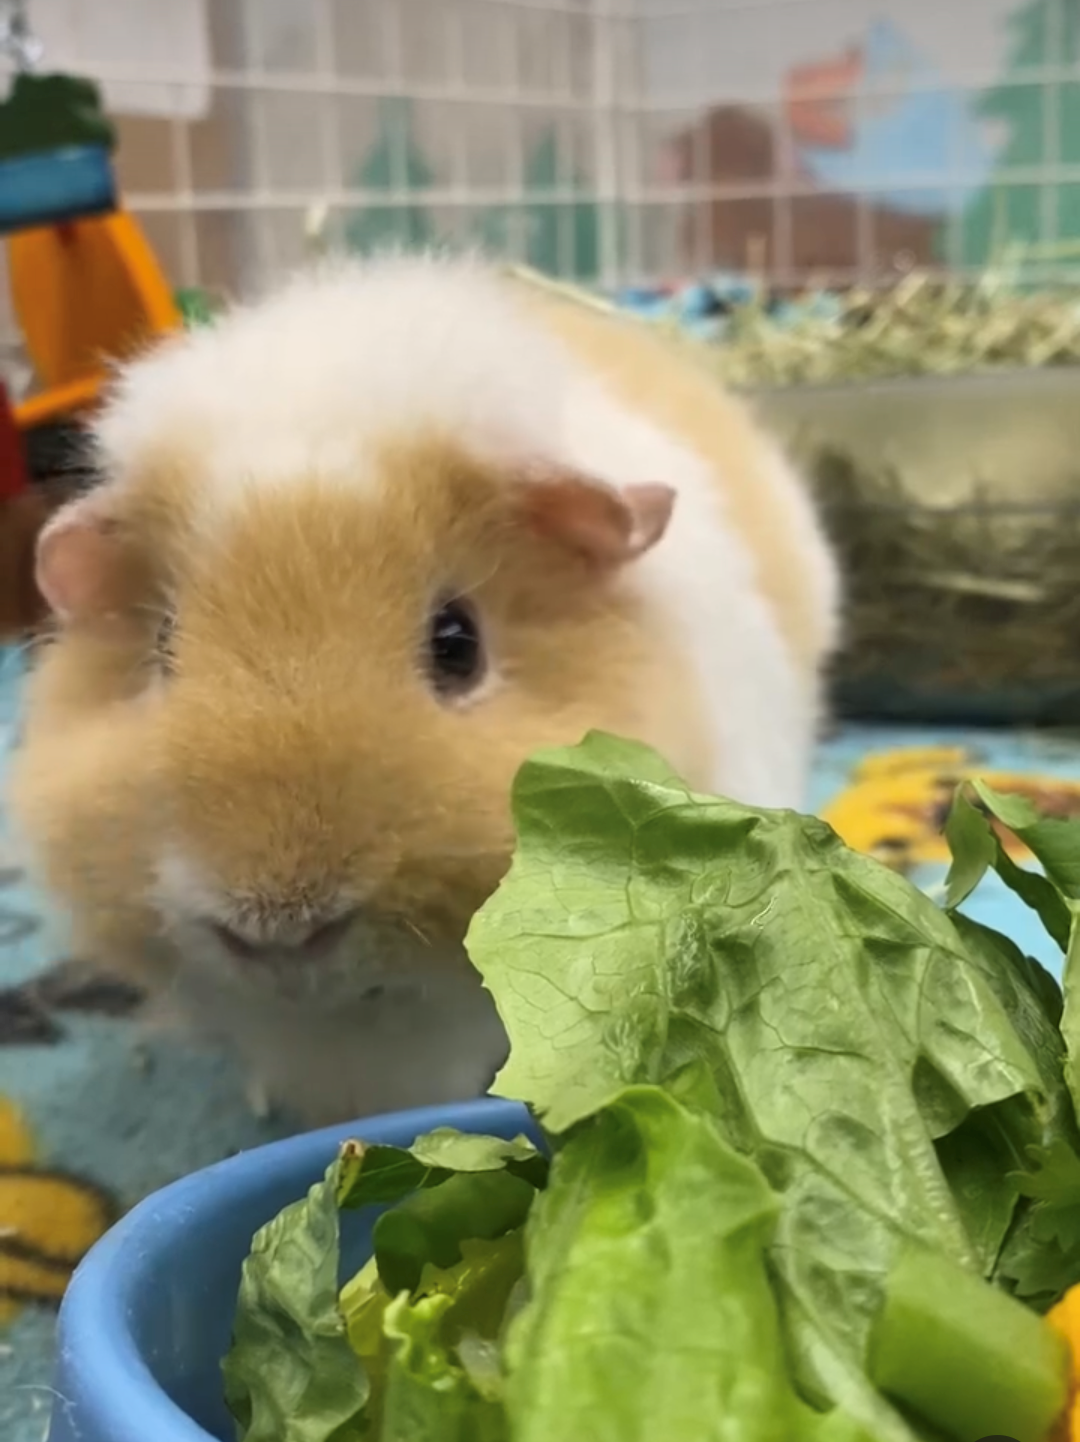 Dewey the gold and white guinea pig eating her morning lettuce